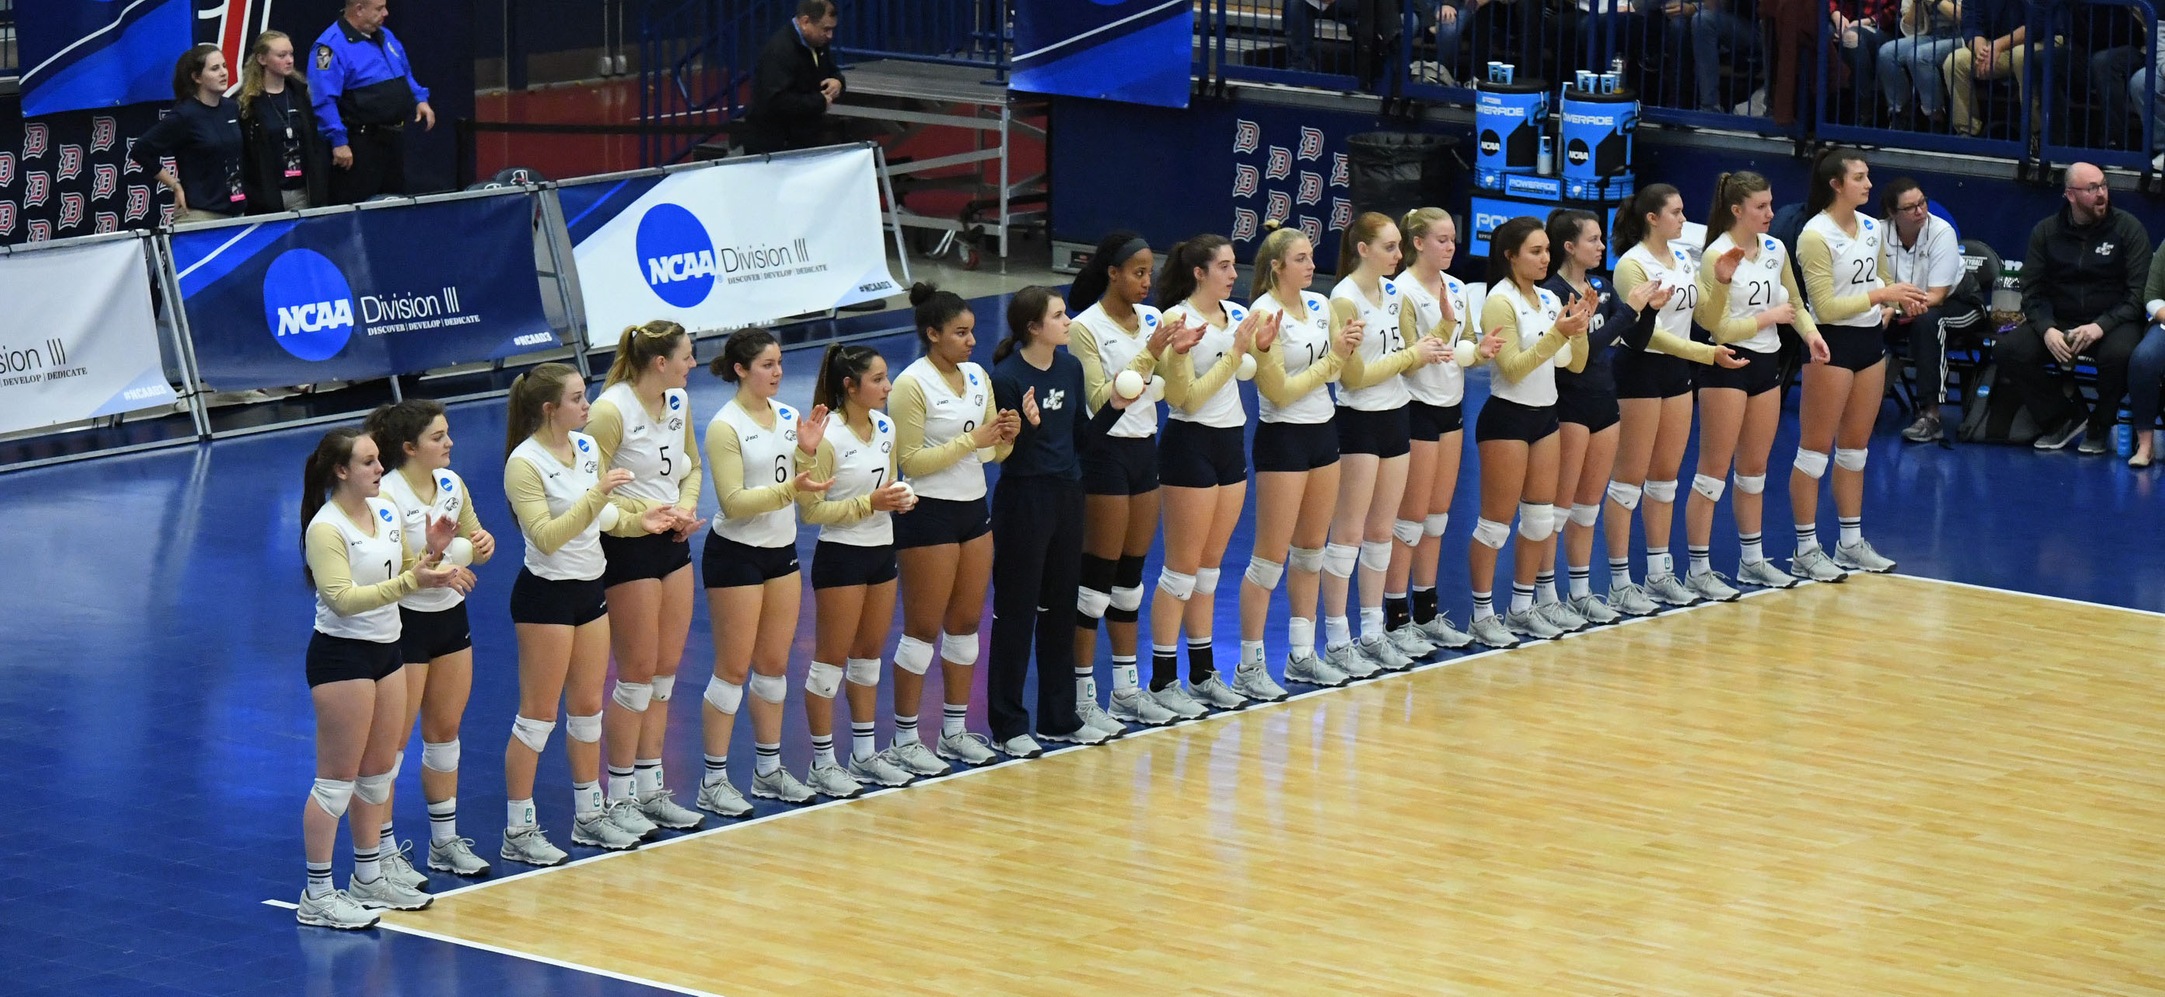 Women's Volleyball Falls to Emory in the Final Four to End Fantastic Season